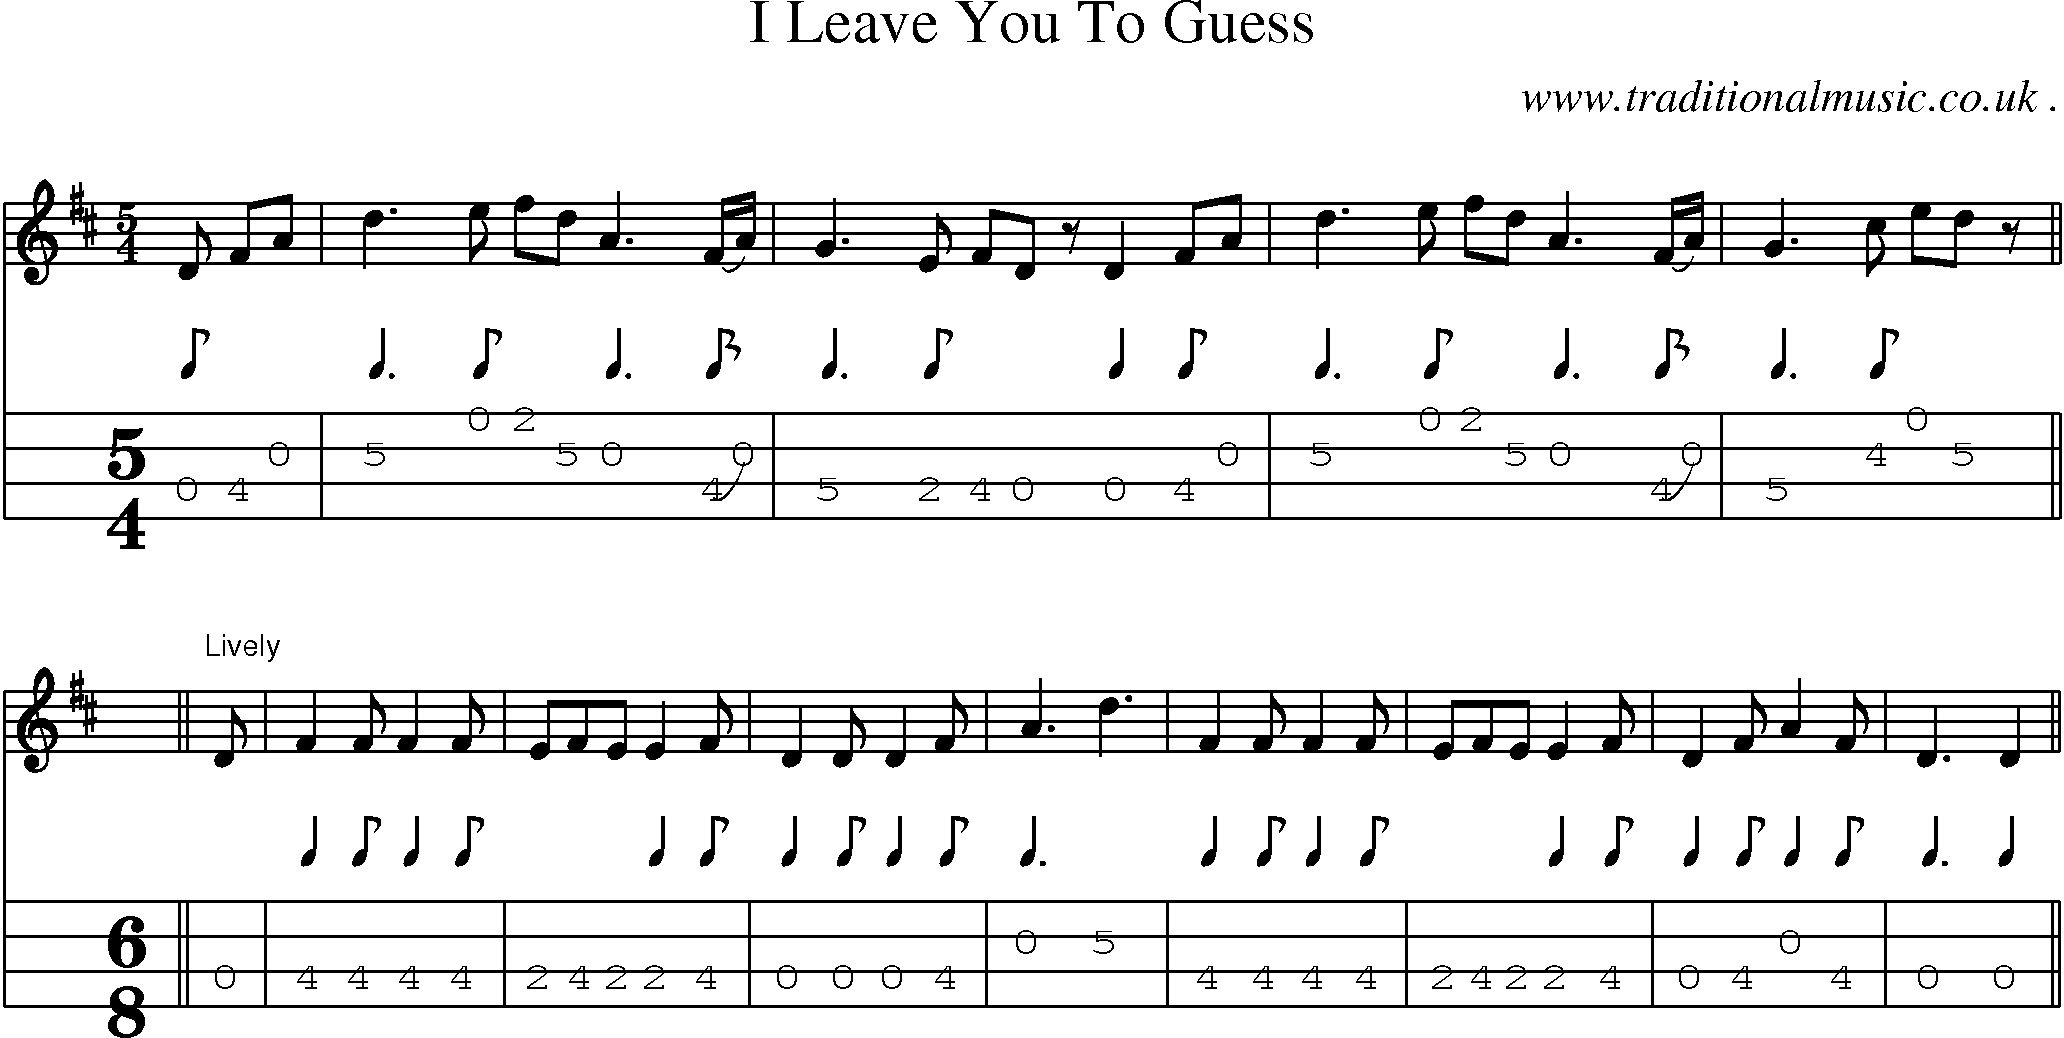 Sheet-music  score, Chords and Mandolin Tabs for I Leave You To Guess